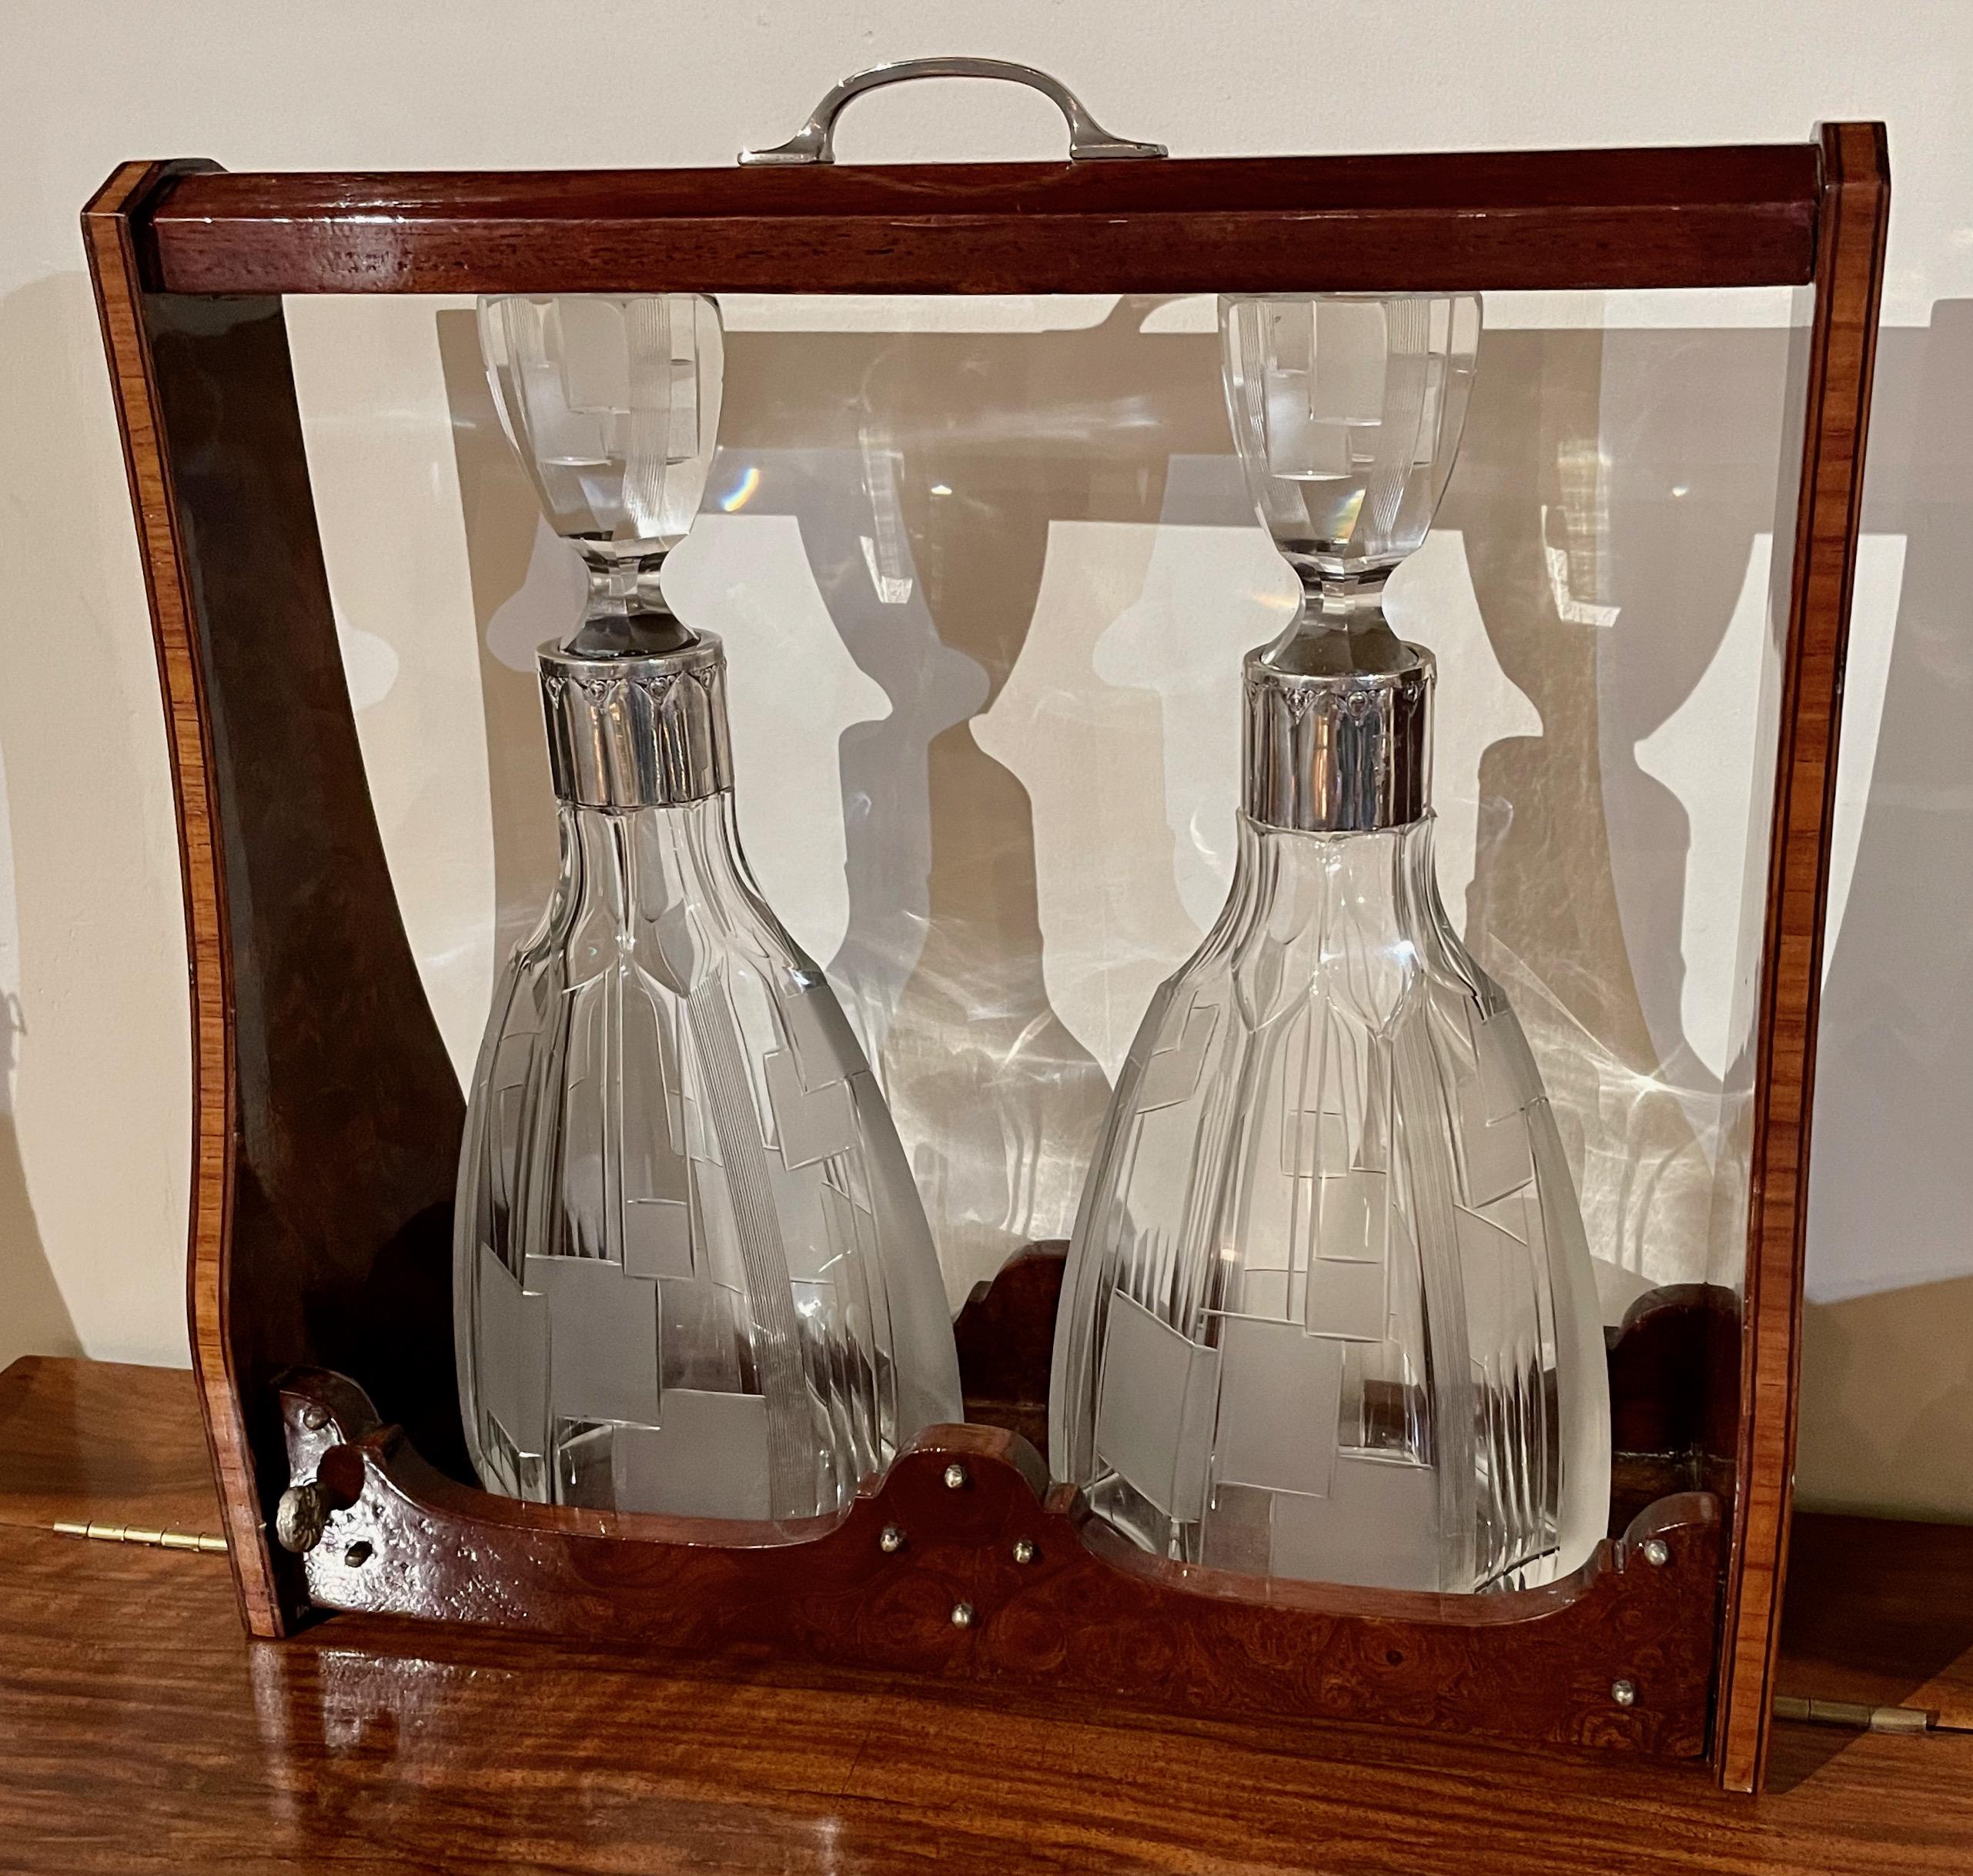 Art Deco silver-mounted tantalus set wood marquetry custom case holder with the lock and handle. Each bottle has polished silver neck support. A unique set with a very modernist approach, stunning cut crystal decanters with matching tops, all in